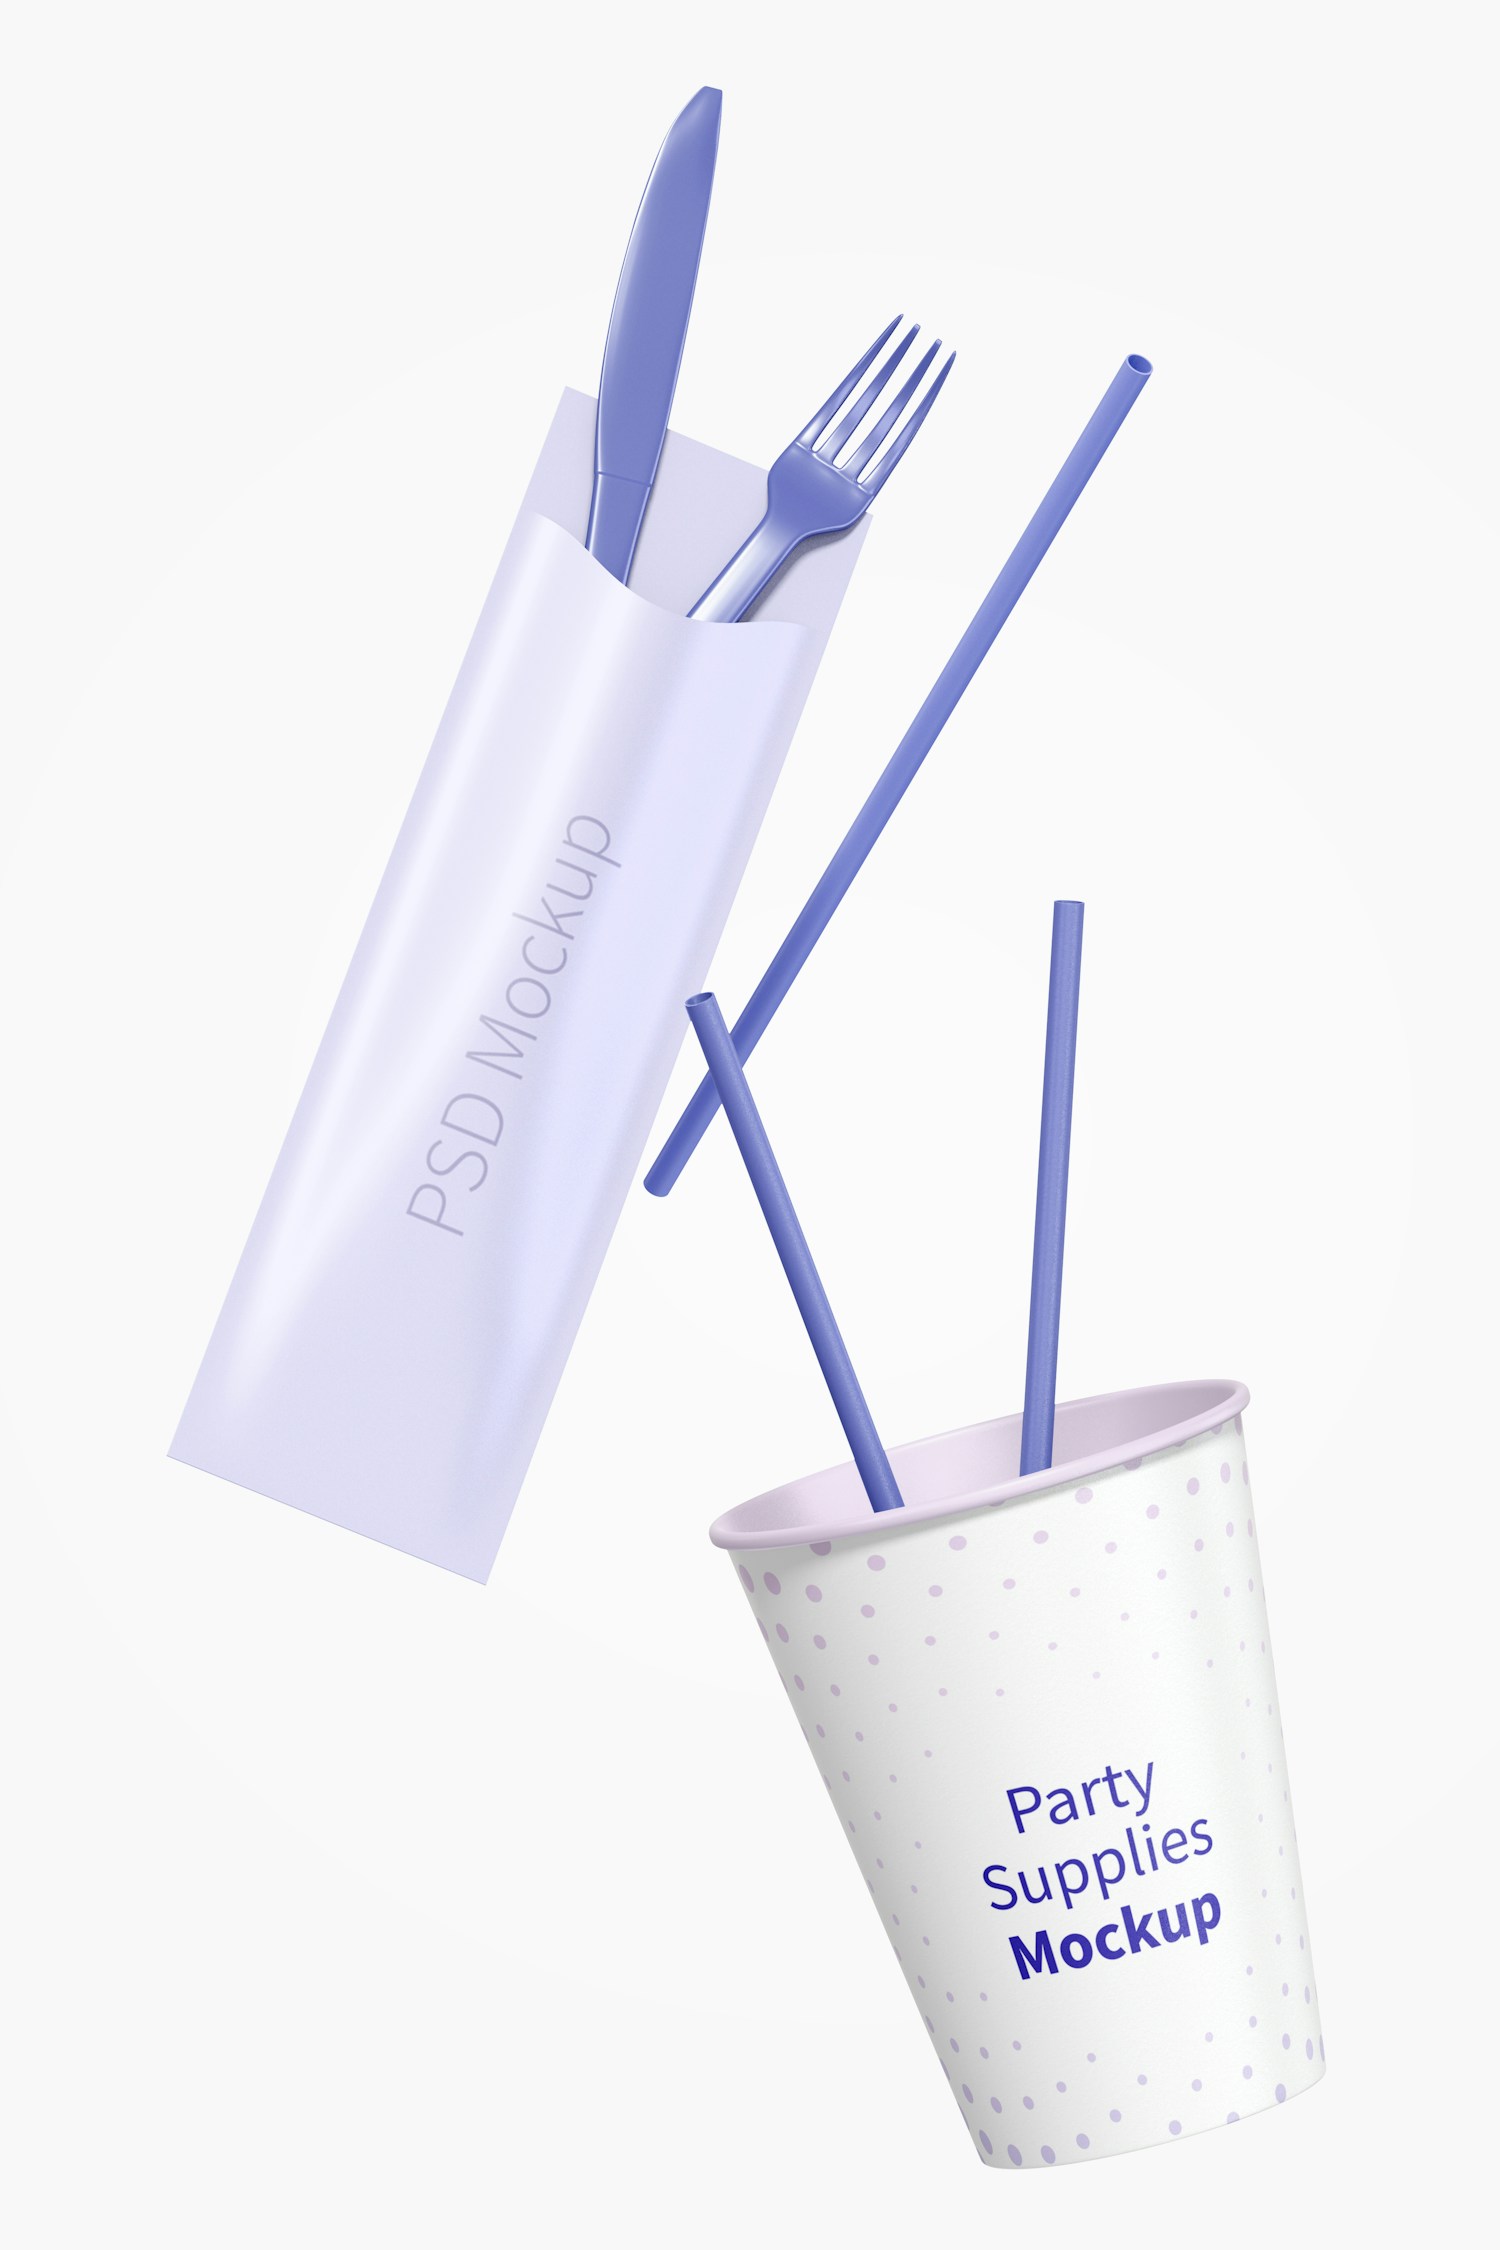 Party Supplies Mockup, Floating